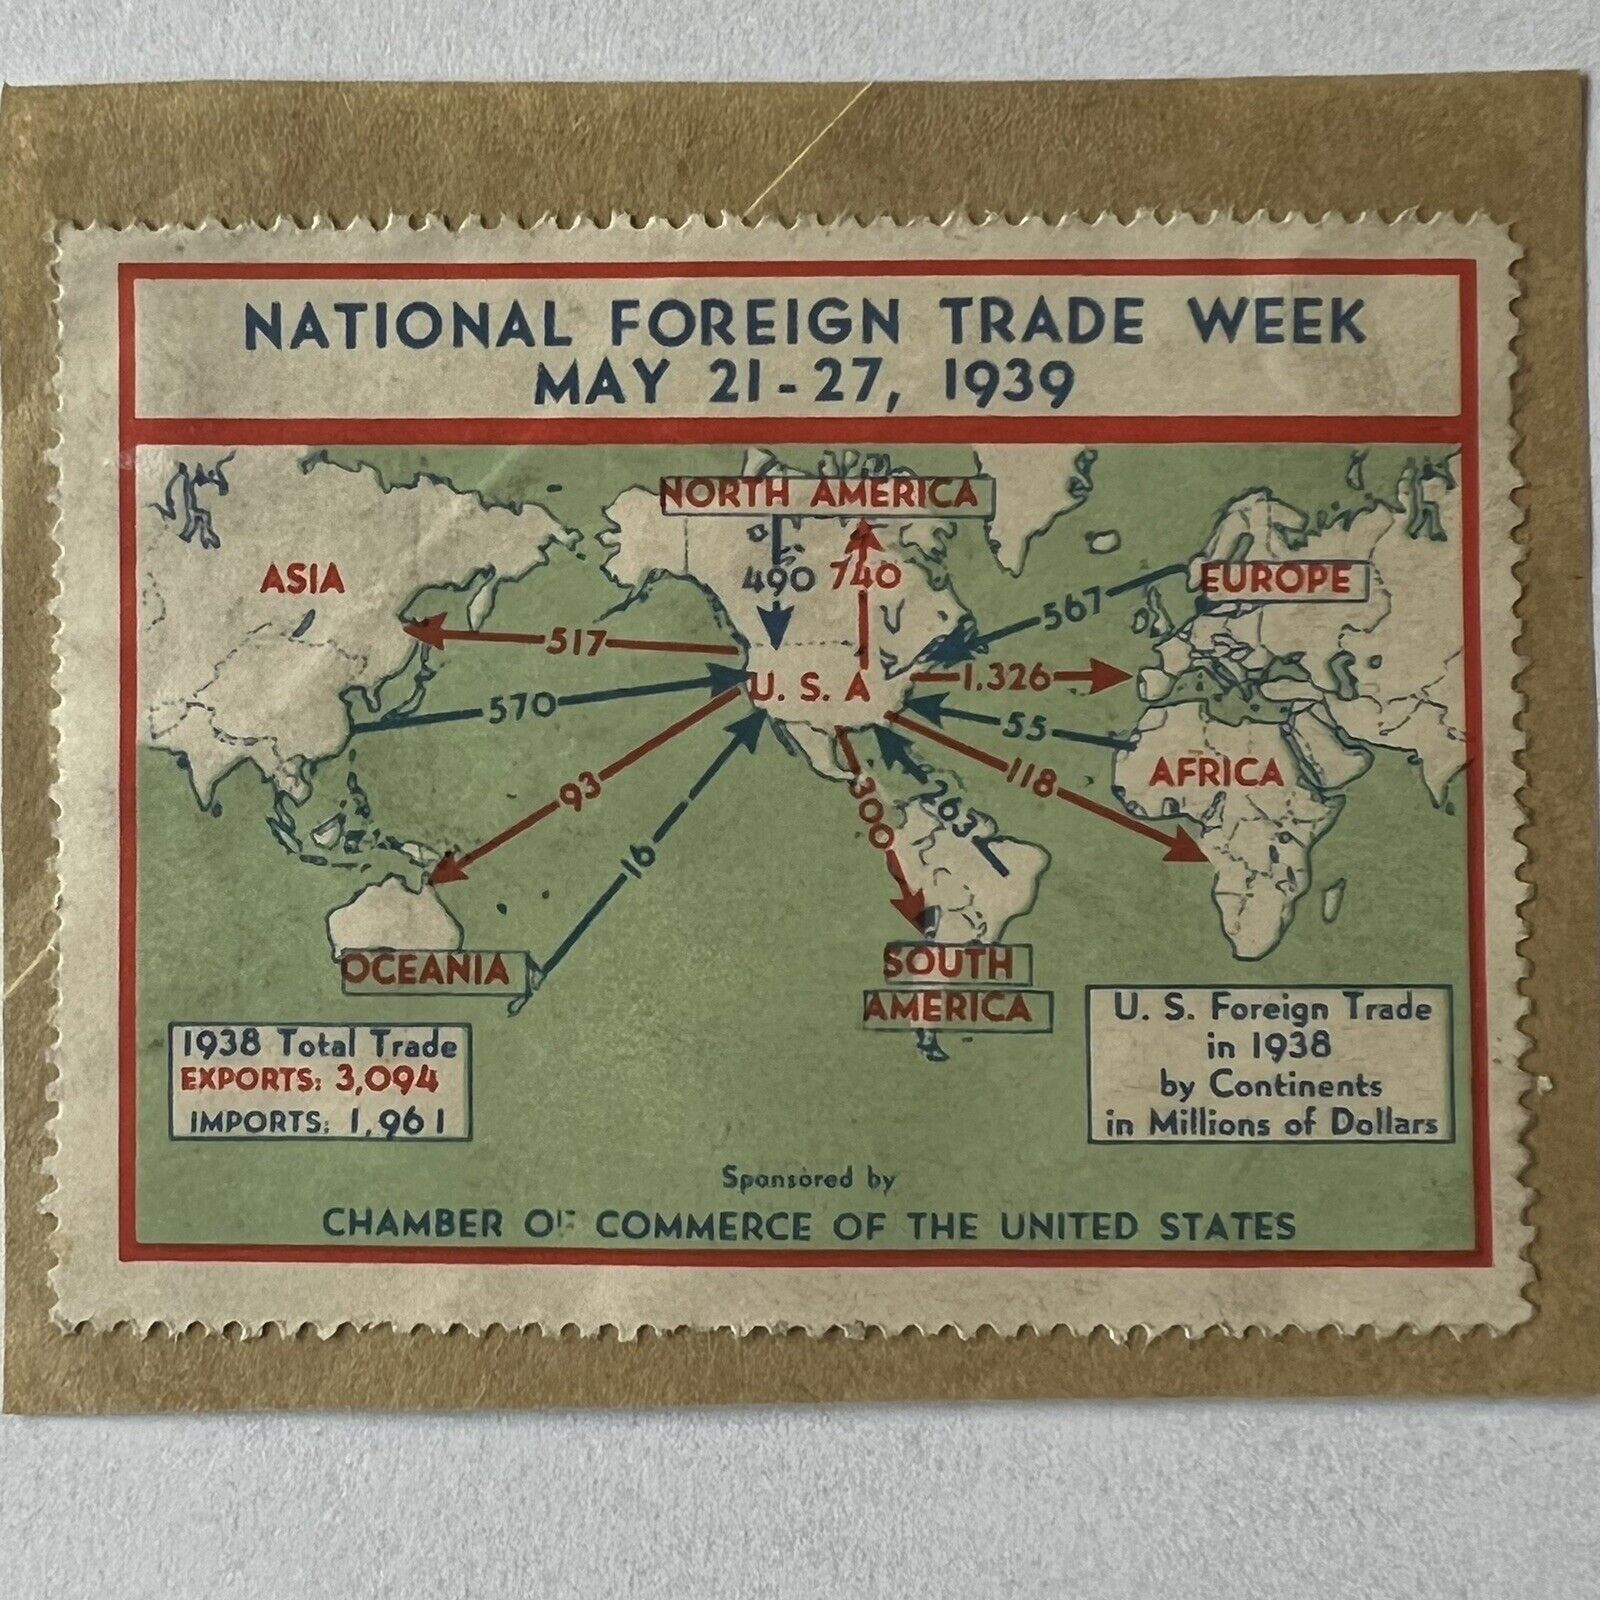 RARE 1939 NATIONAL FOREIGN TRADE WEEK CINDERELLA SEAL POSTER STAMP WORLD MAP